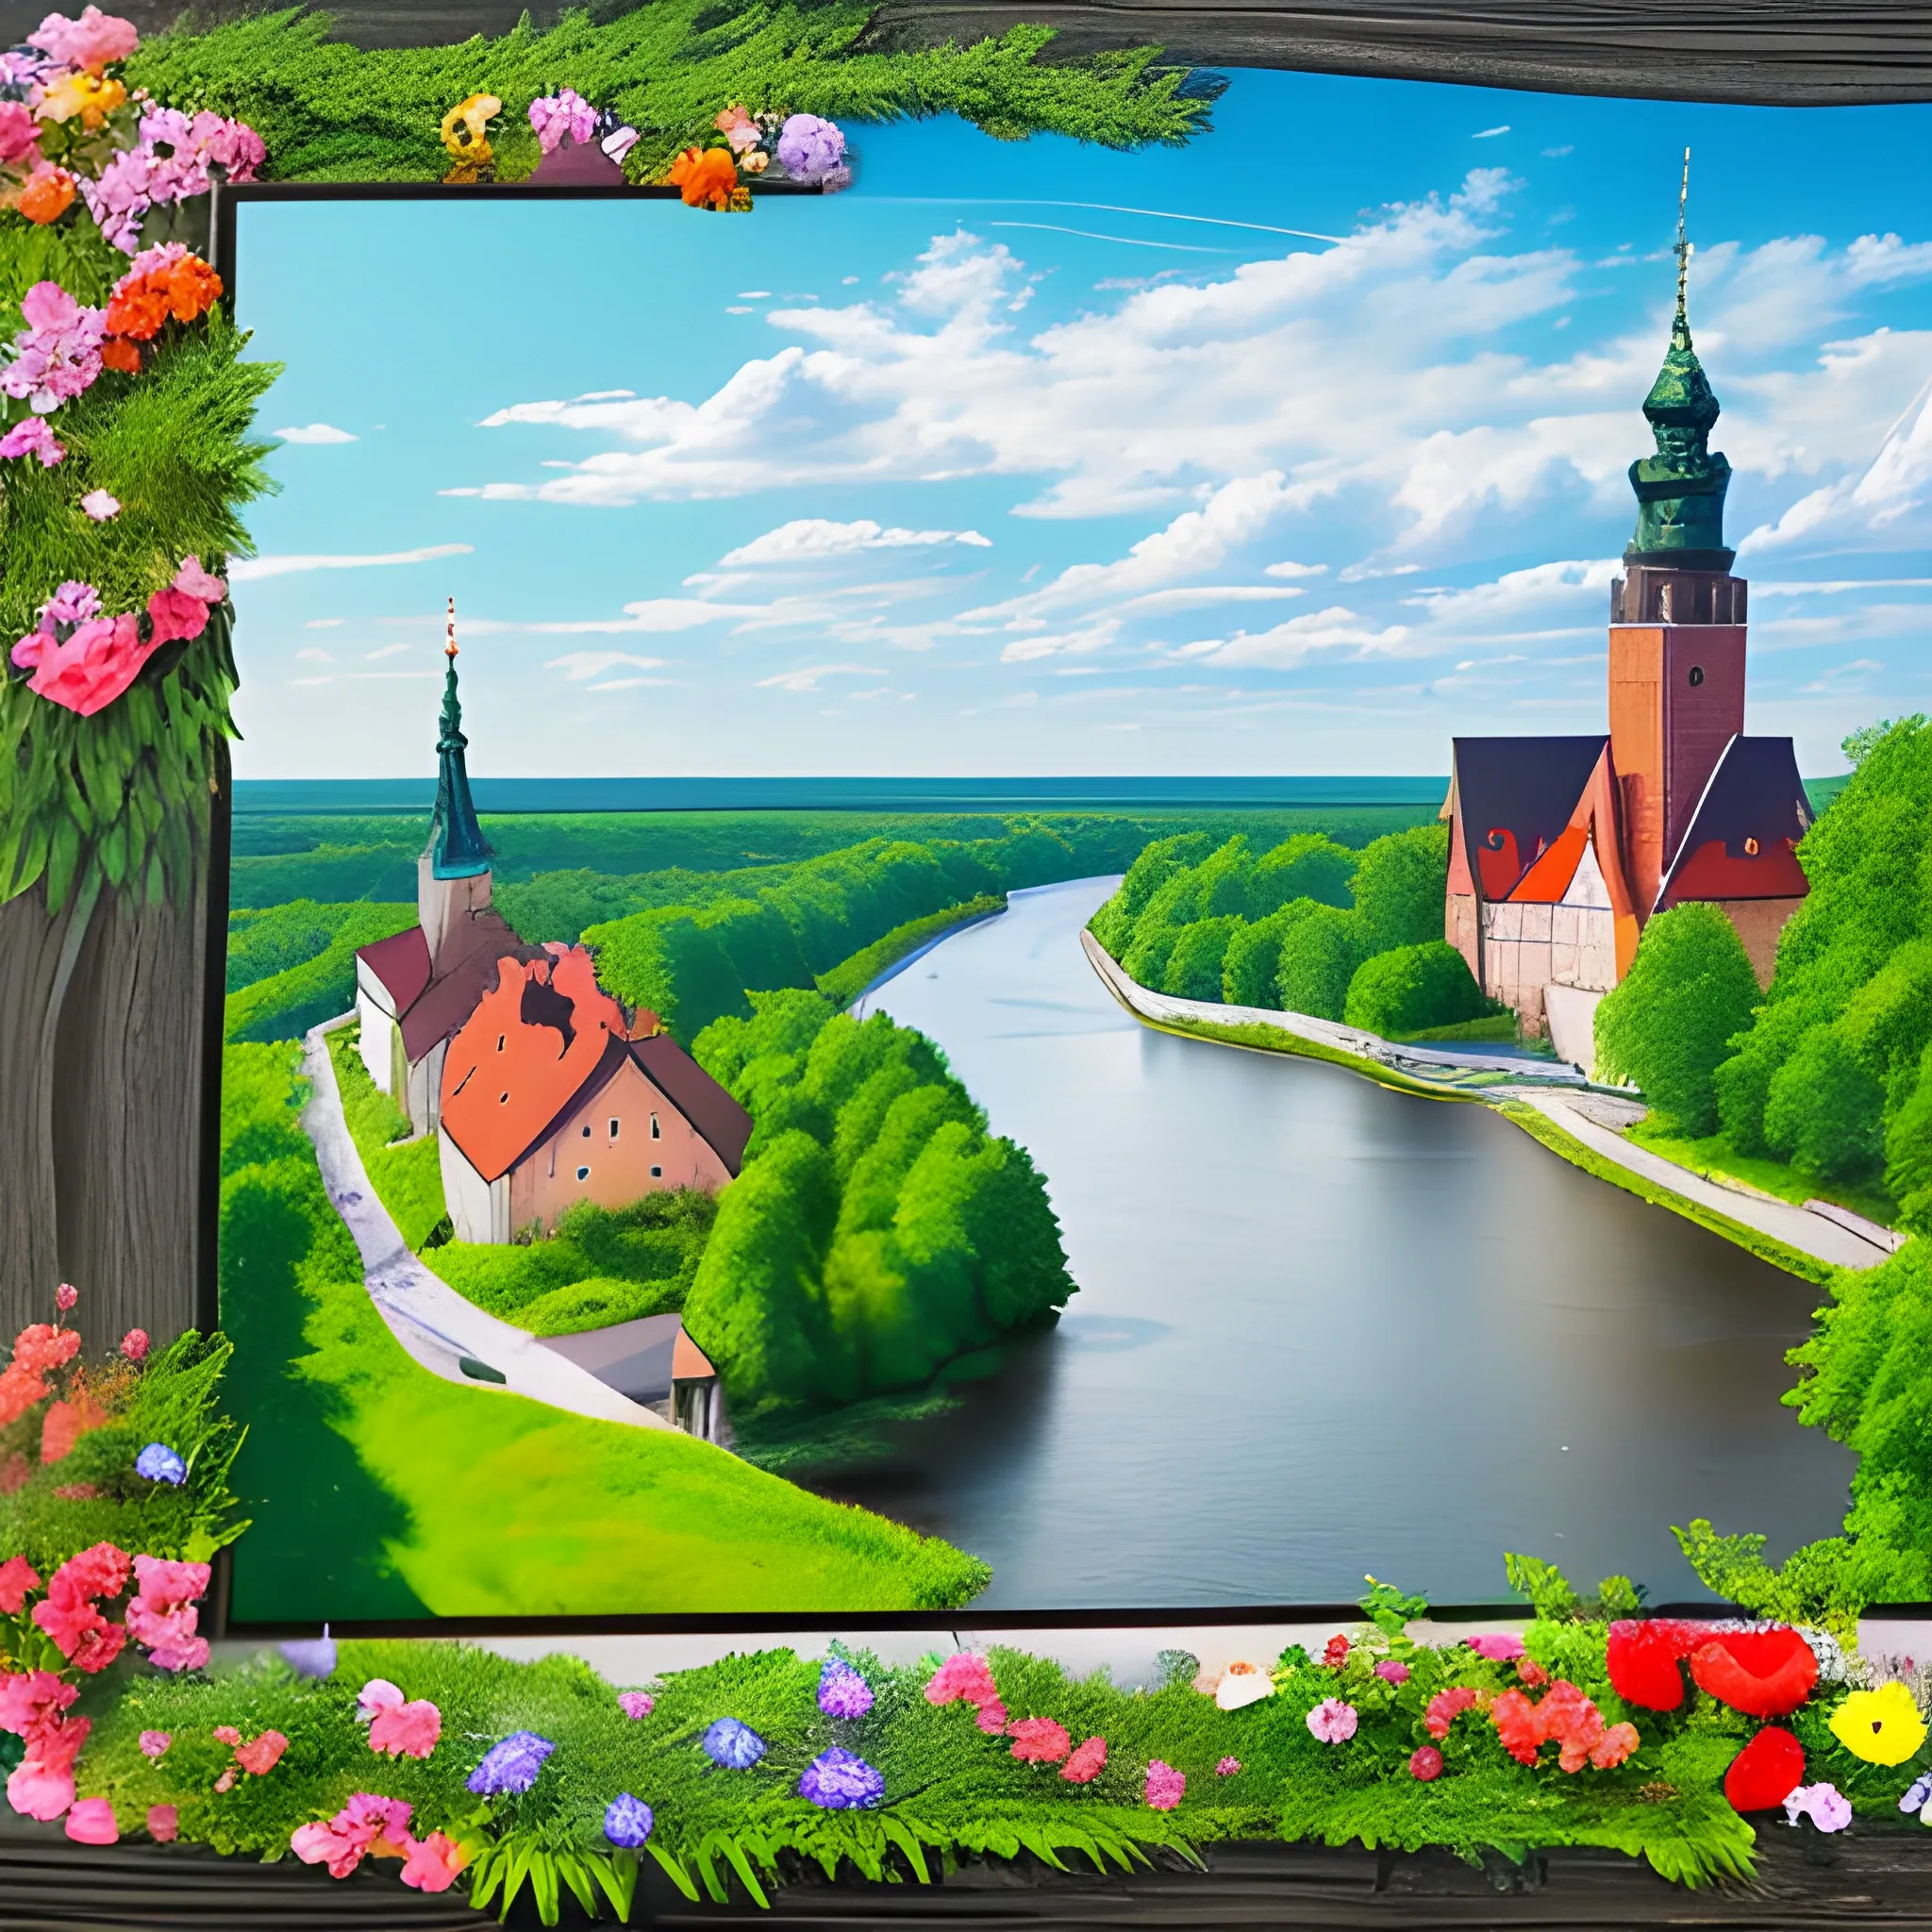 Draw a picturesque view of Poland showcasing the diverse landscapes and landmarks of the country. Fill the entire frame with the picture, do not leave any border.